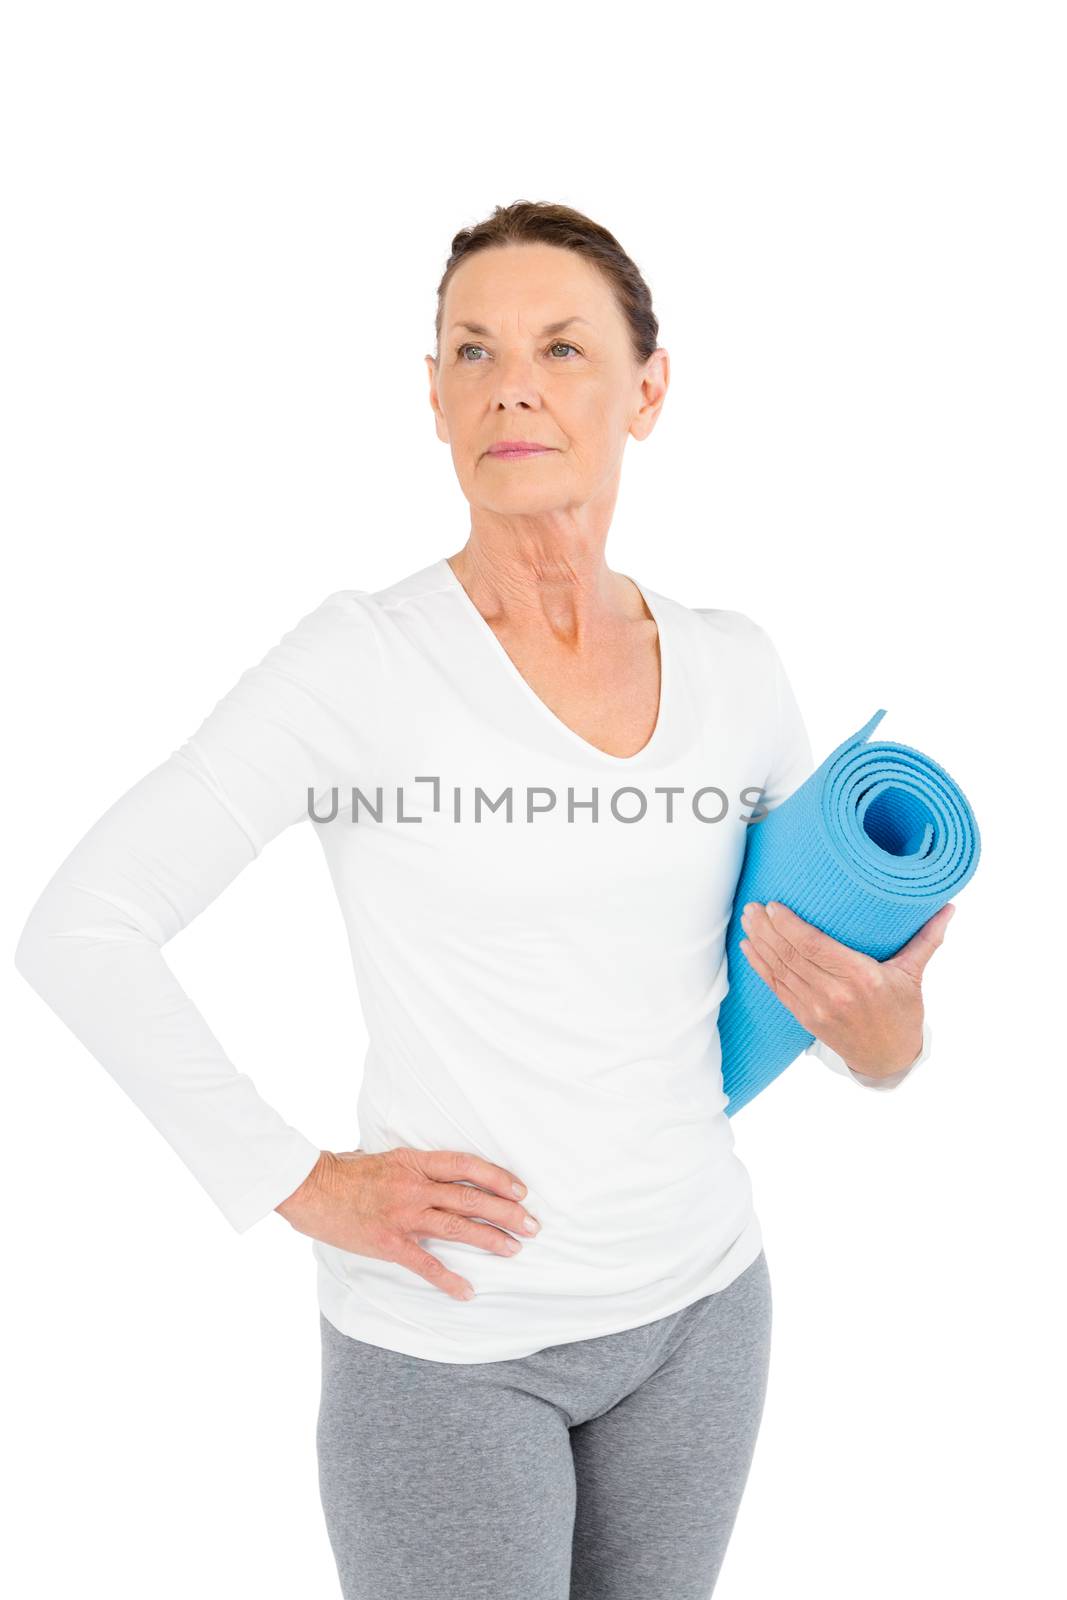 Mature woman holding exercise mat while standing on white background